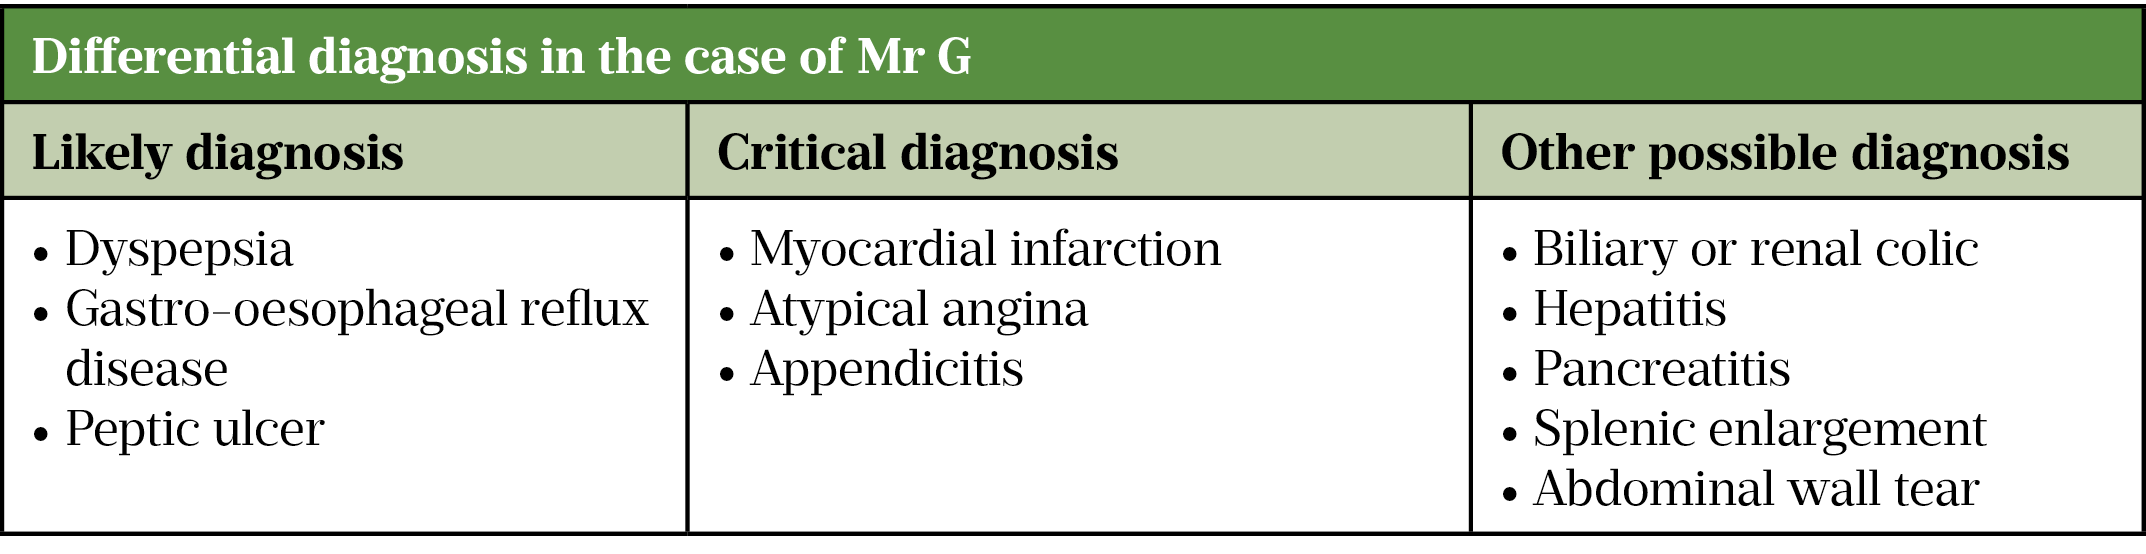 Table 1: Differential diagnosis in the case of Mr G